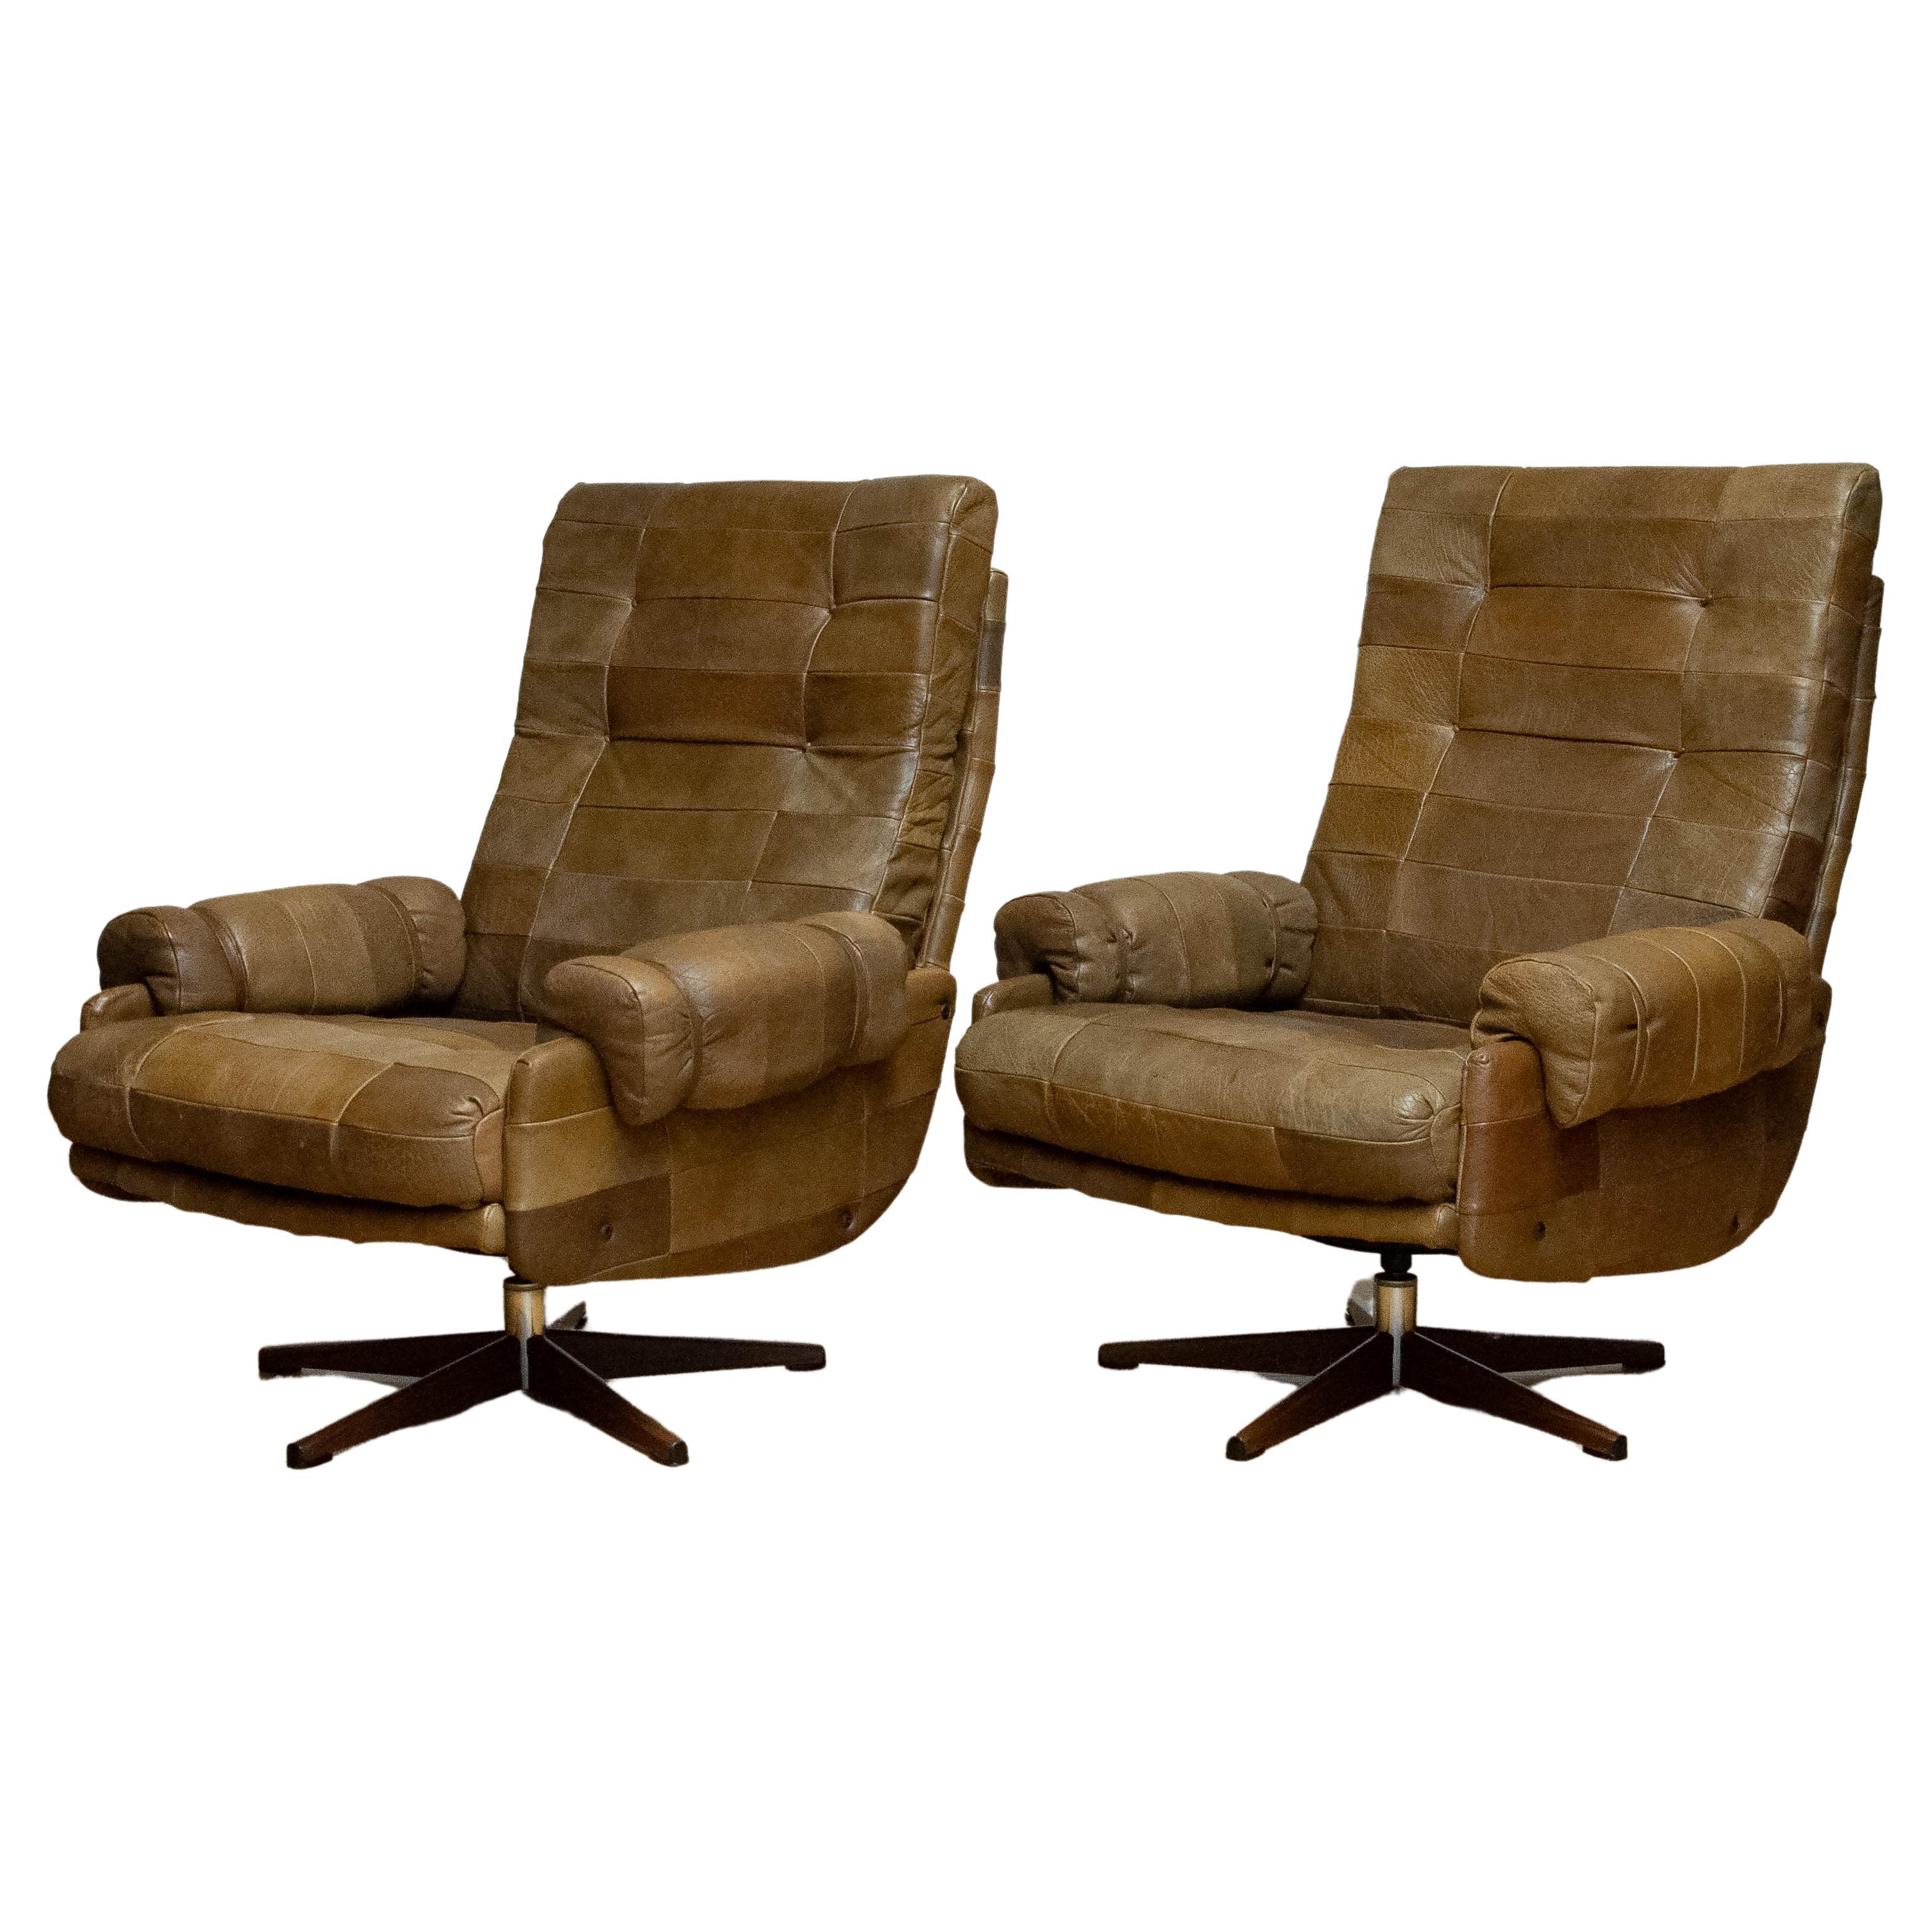 70s Pair Swivel Chairs By Arne Norell In Sturdy Olive Green Buffalo Leather